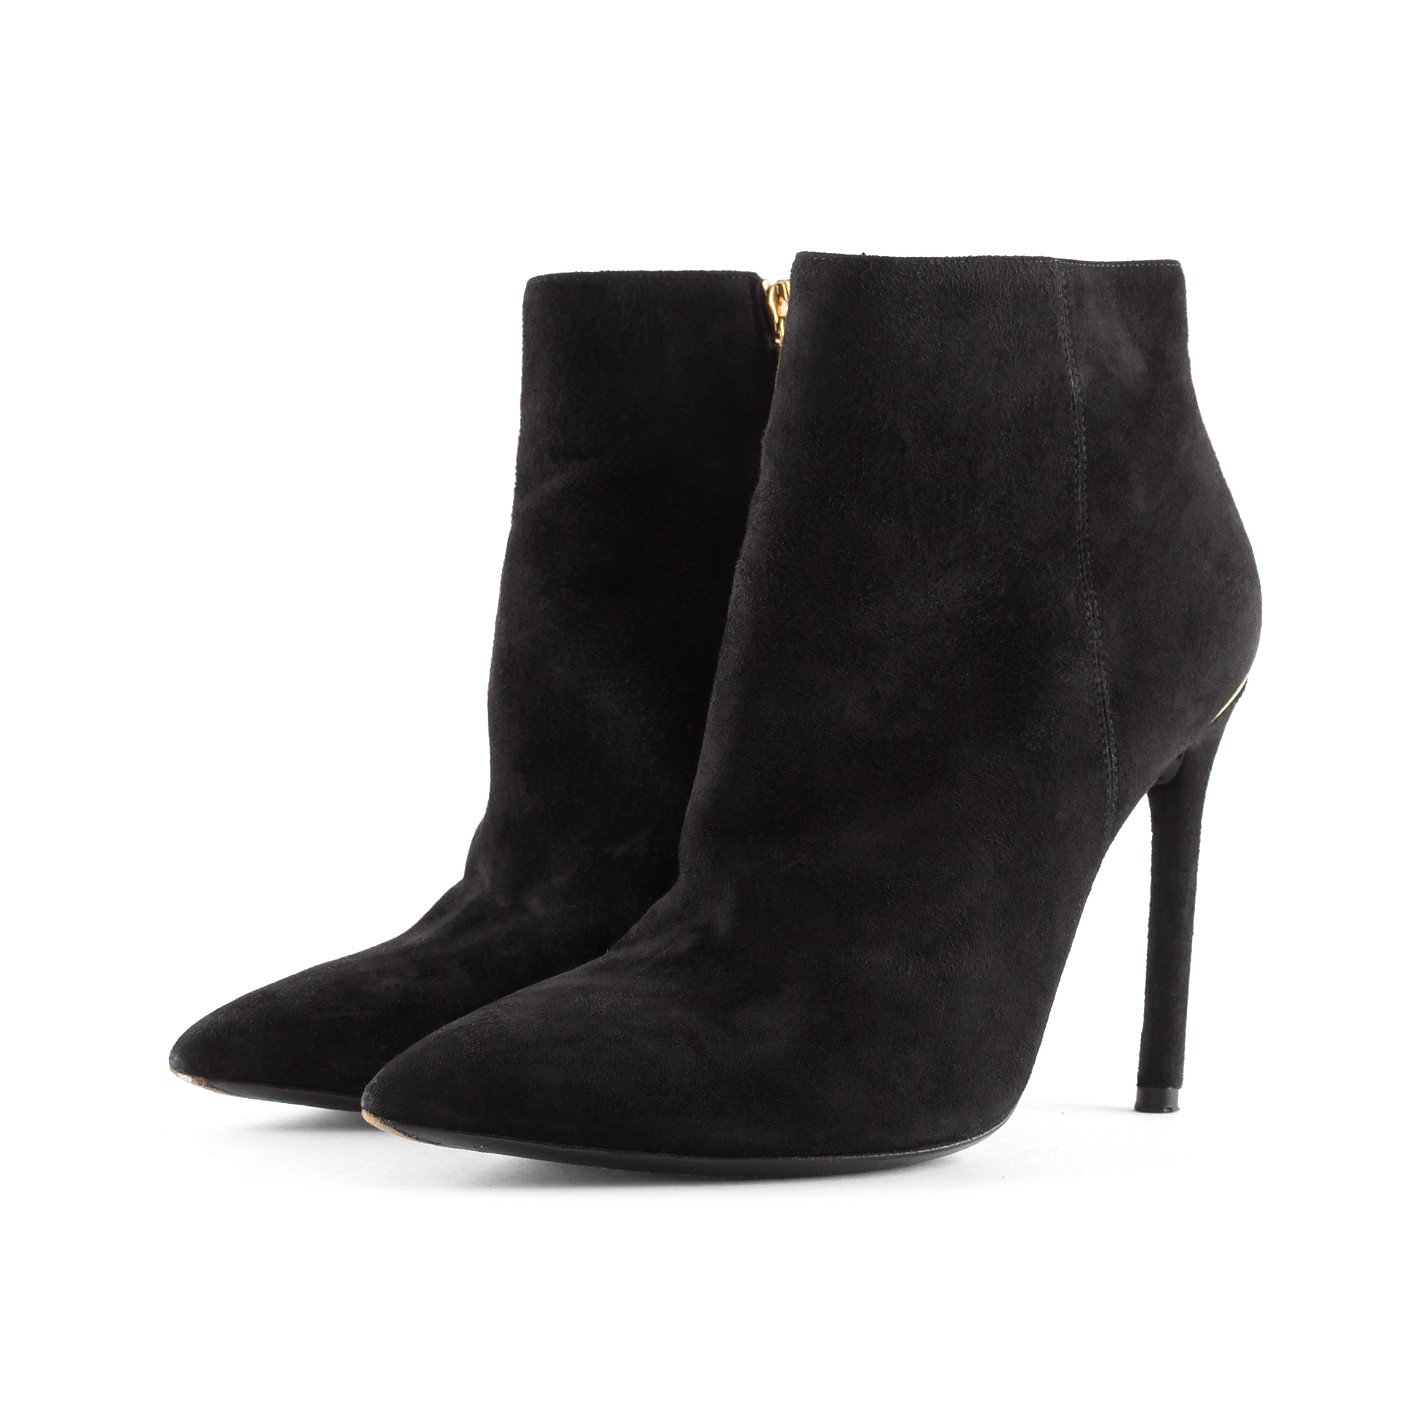 Tom Ford Suede Heeled Ankle Boots